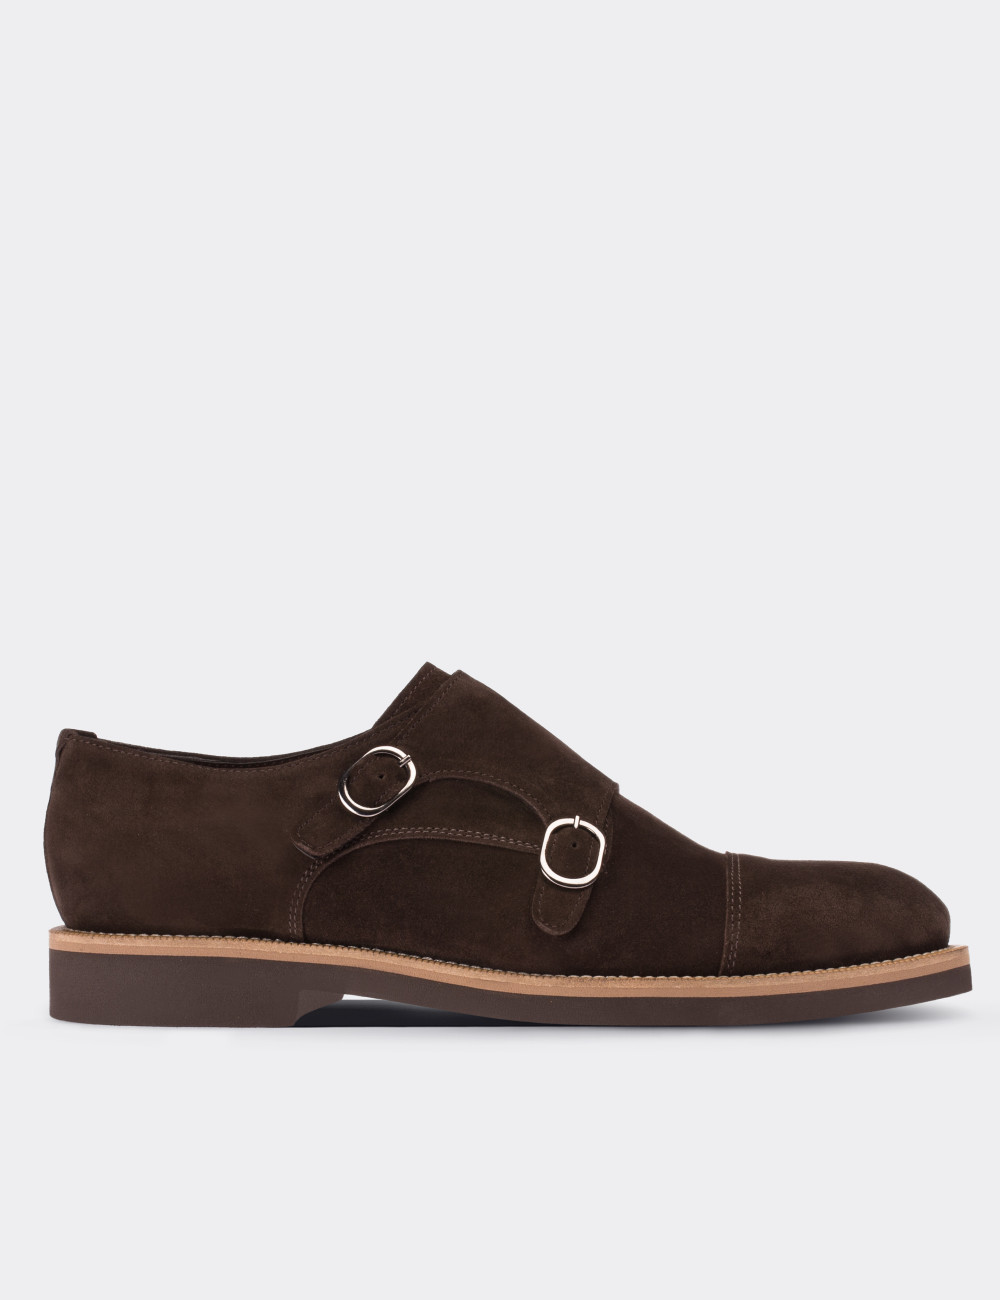 Brown Suede Leather Monk Straps Shoes - 01566MKHVE01